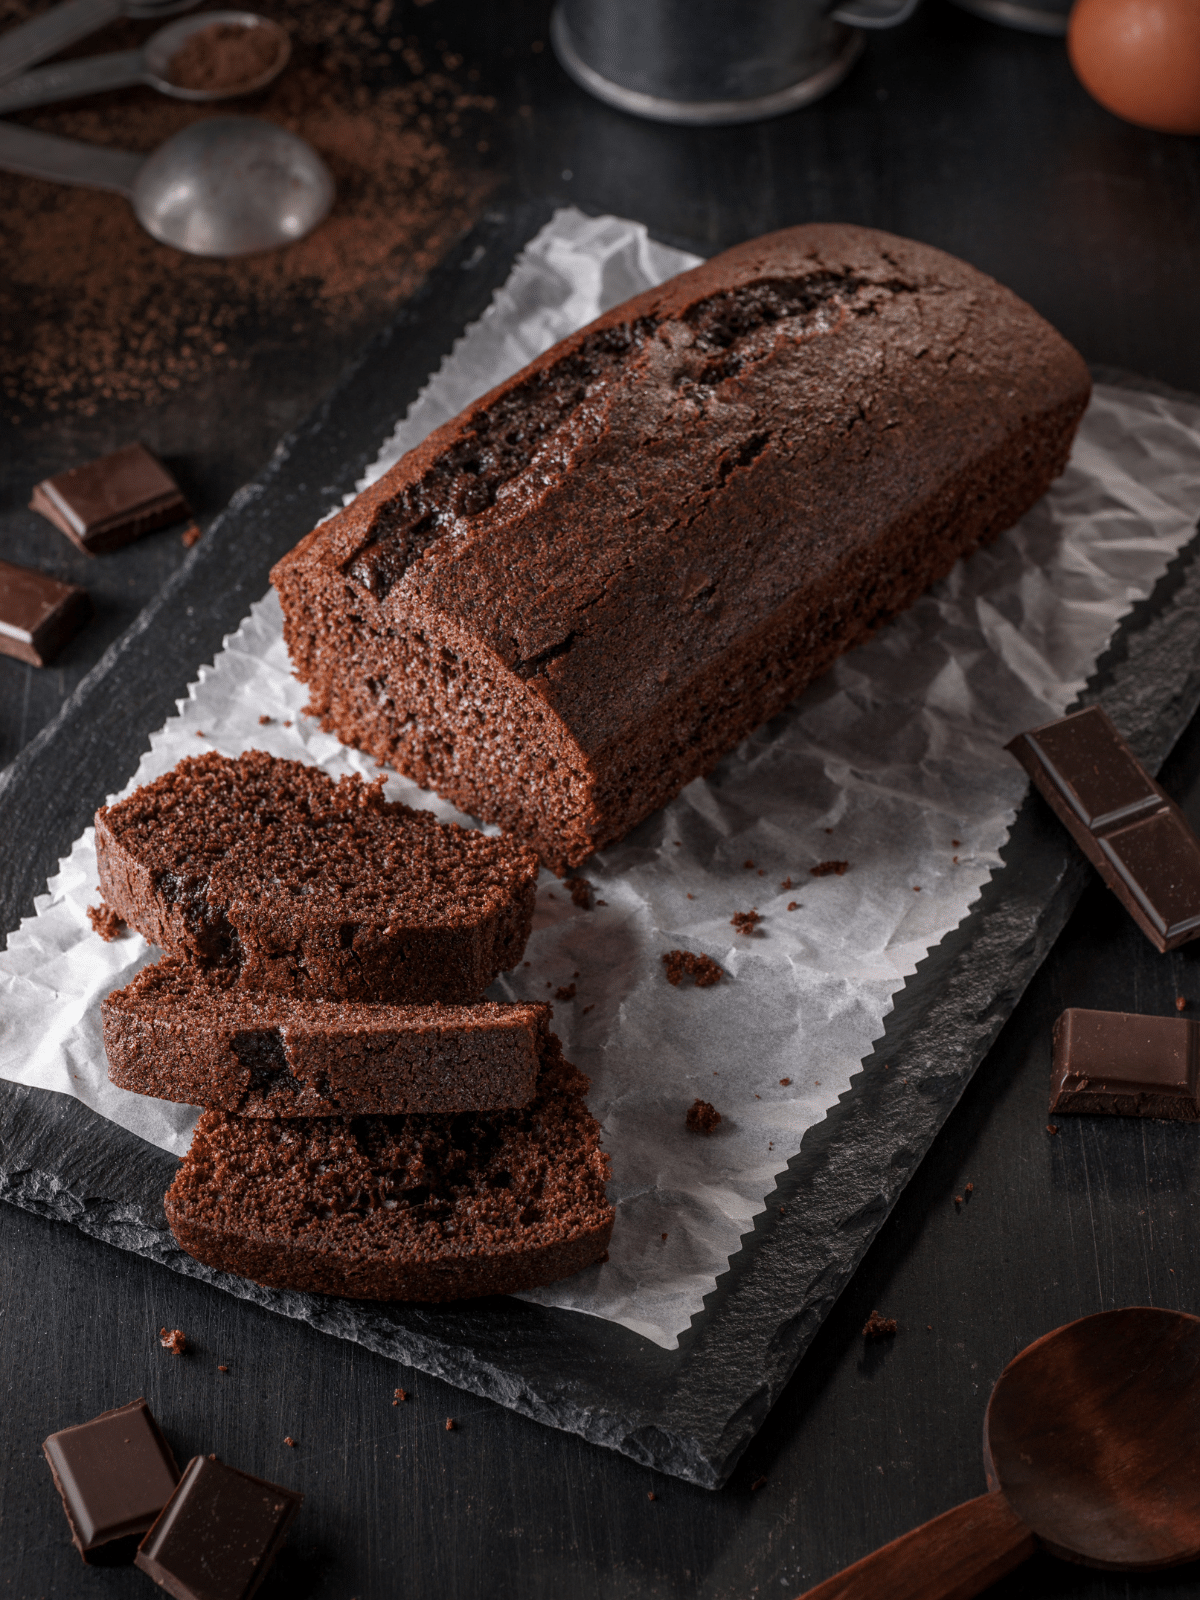 Freshly baked chocolate cake with three slices.